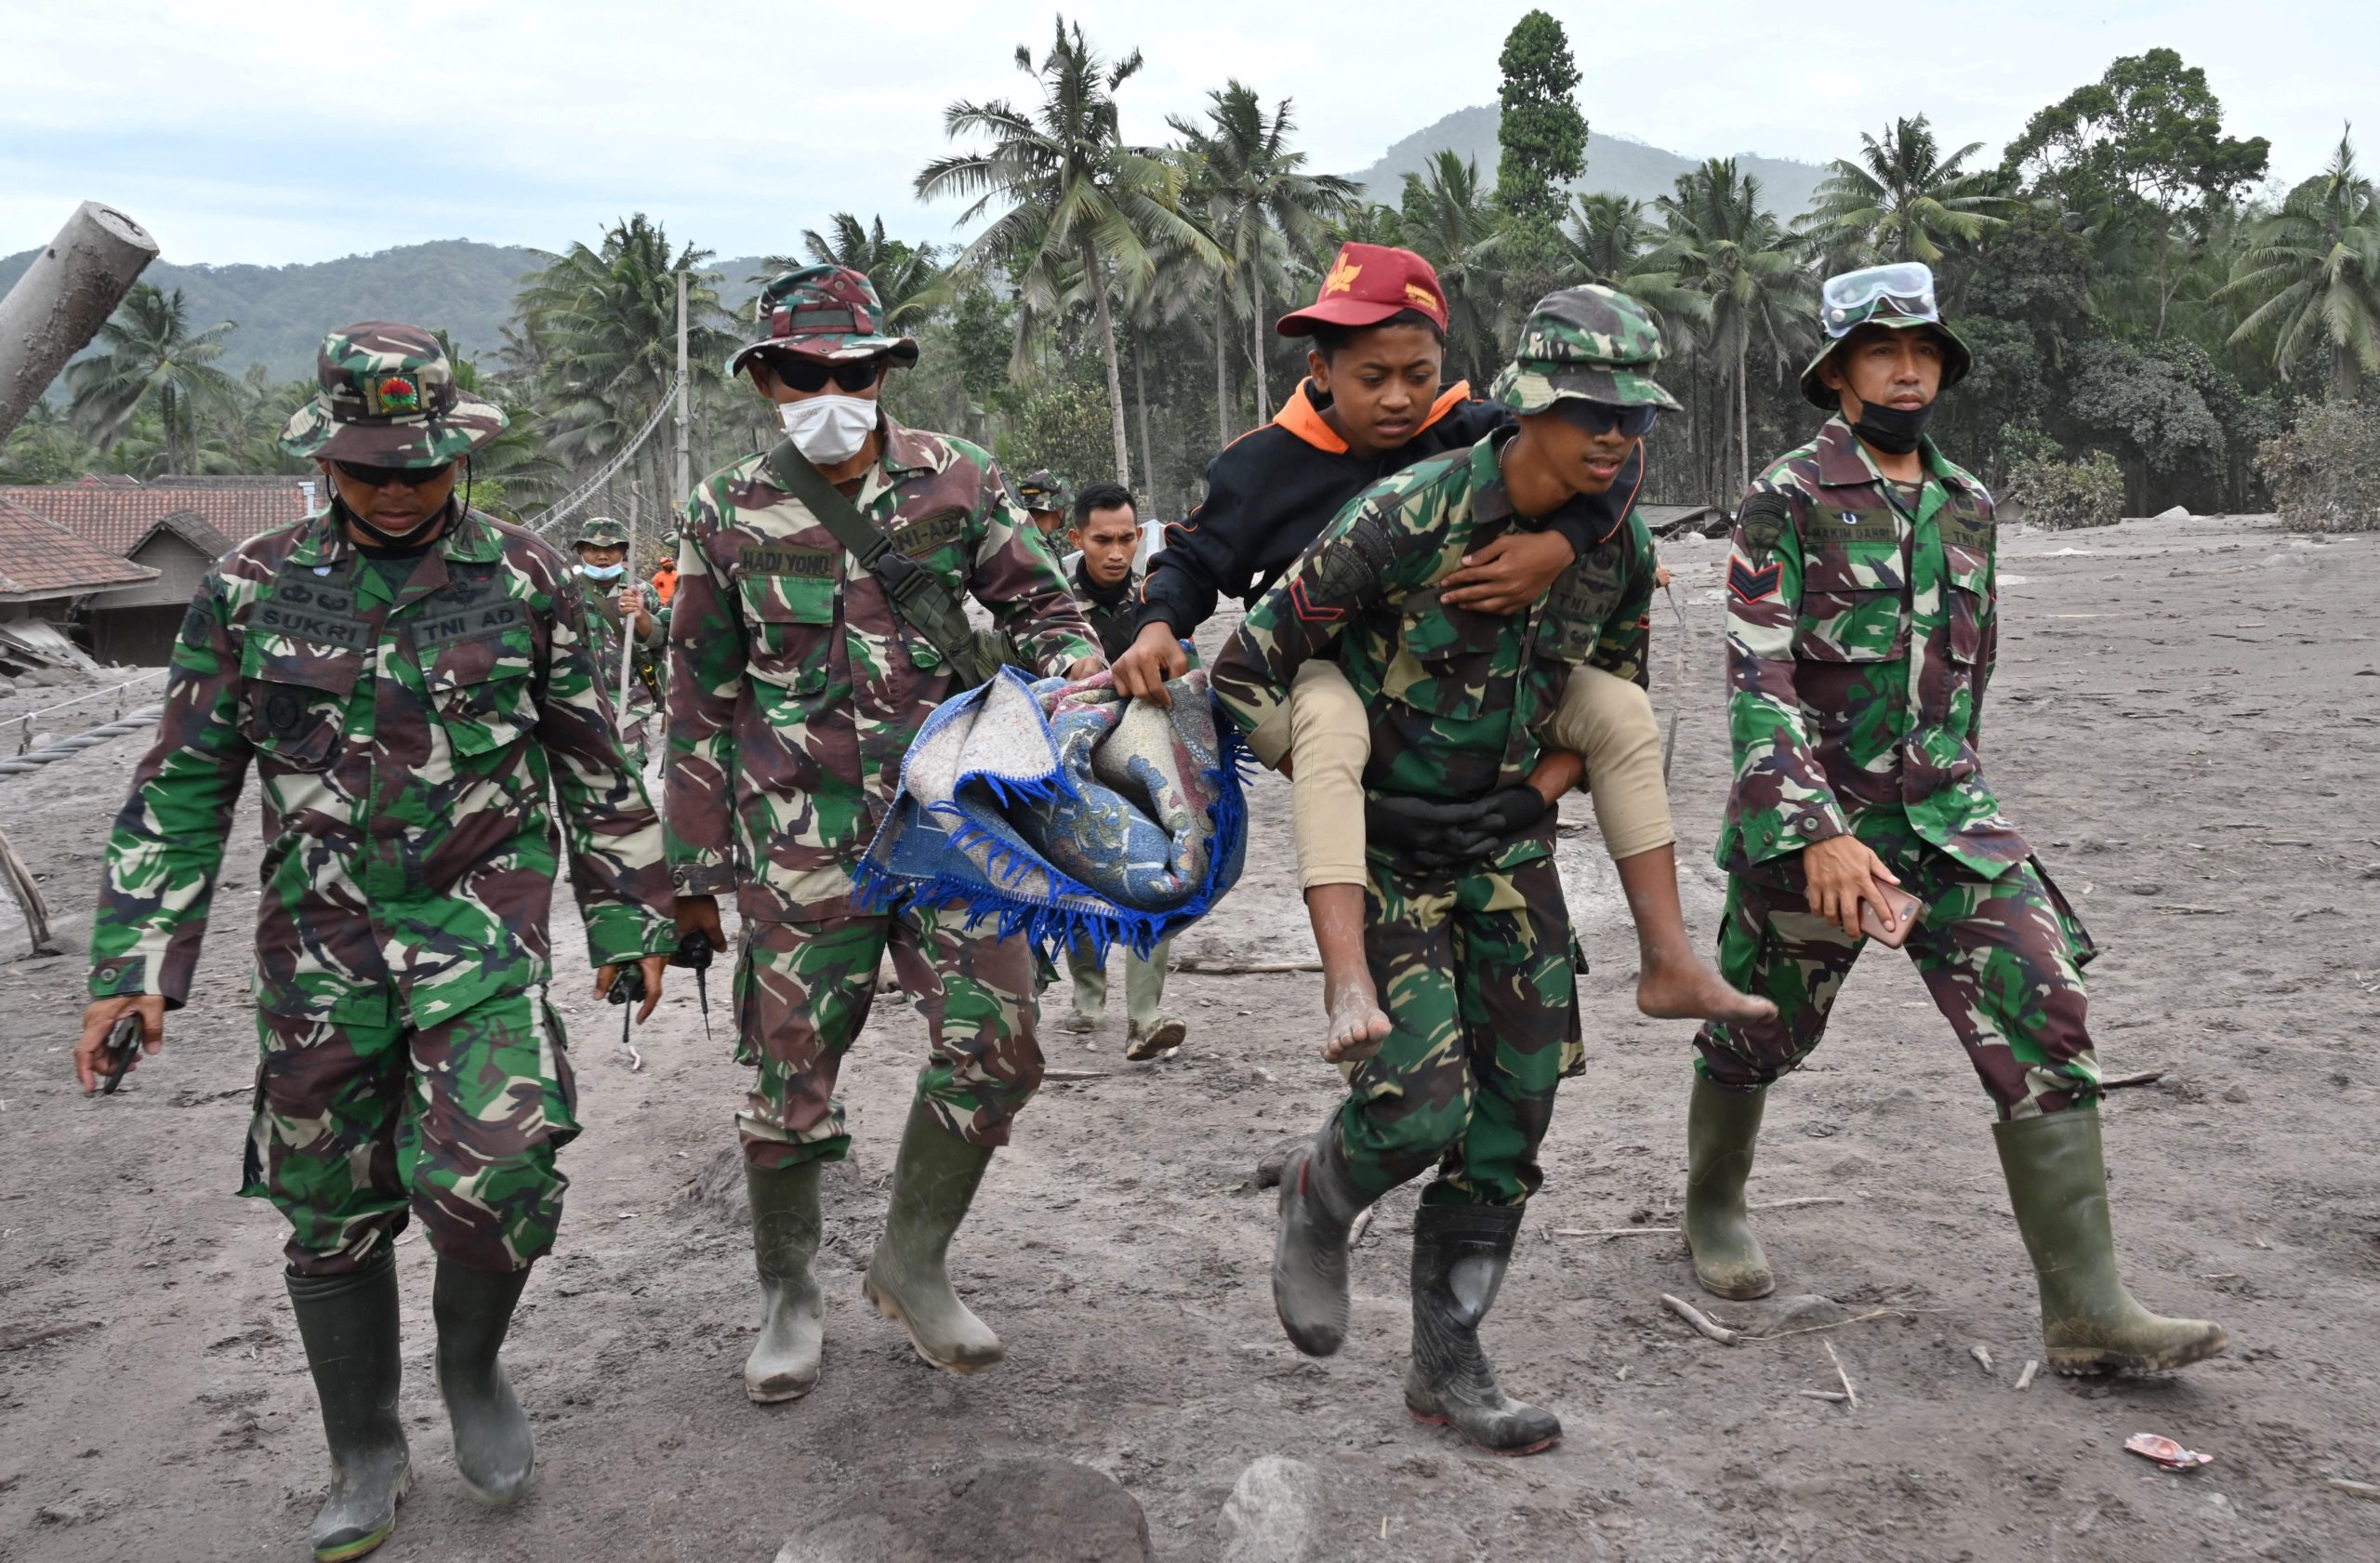 Members of a search and rescue team carry a villager during an operation at the Sumberwuluh village. (Photo: Adek Berry/AFP, Getty Images)